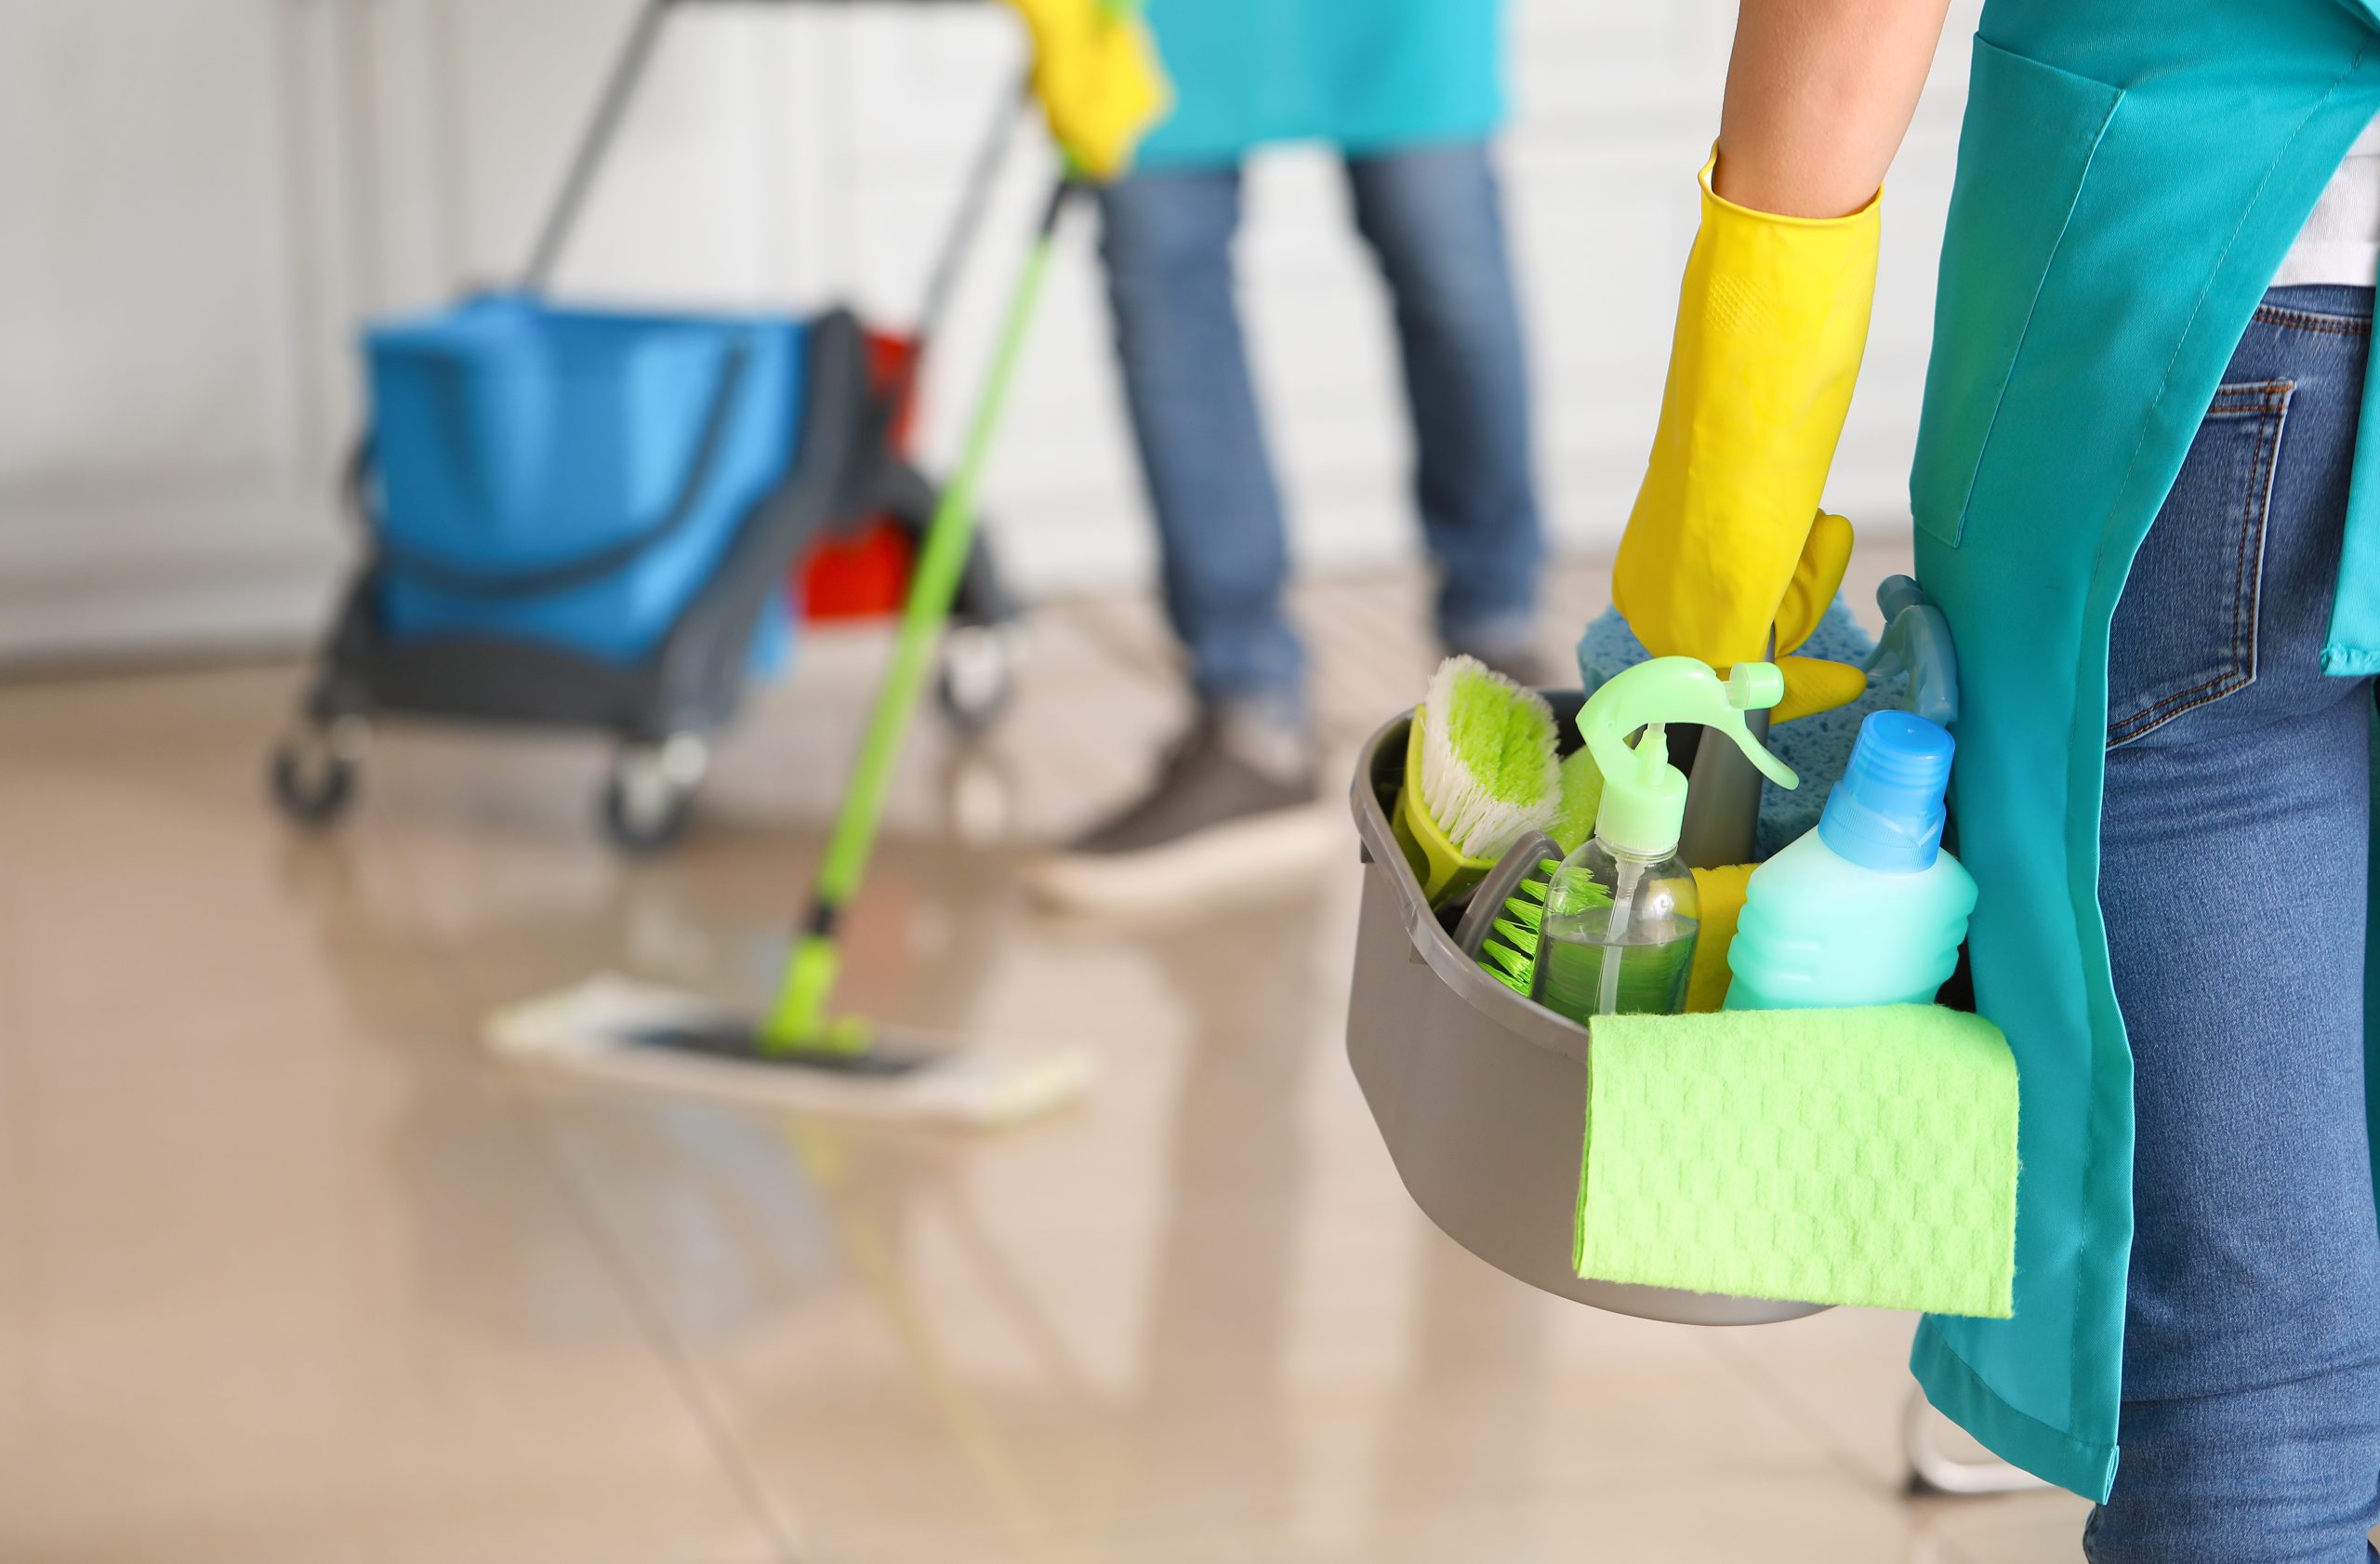 Can you accommodate my schedule for a one-time cleaning?